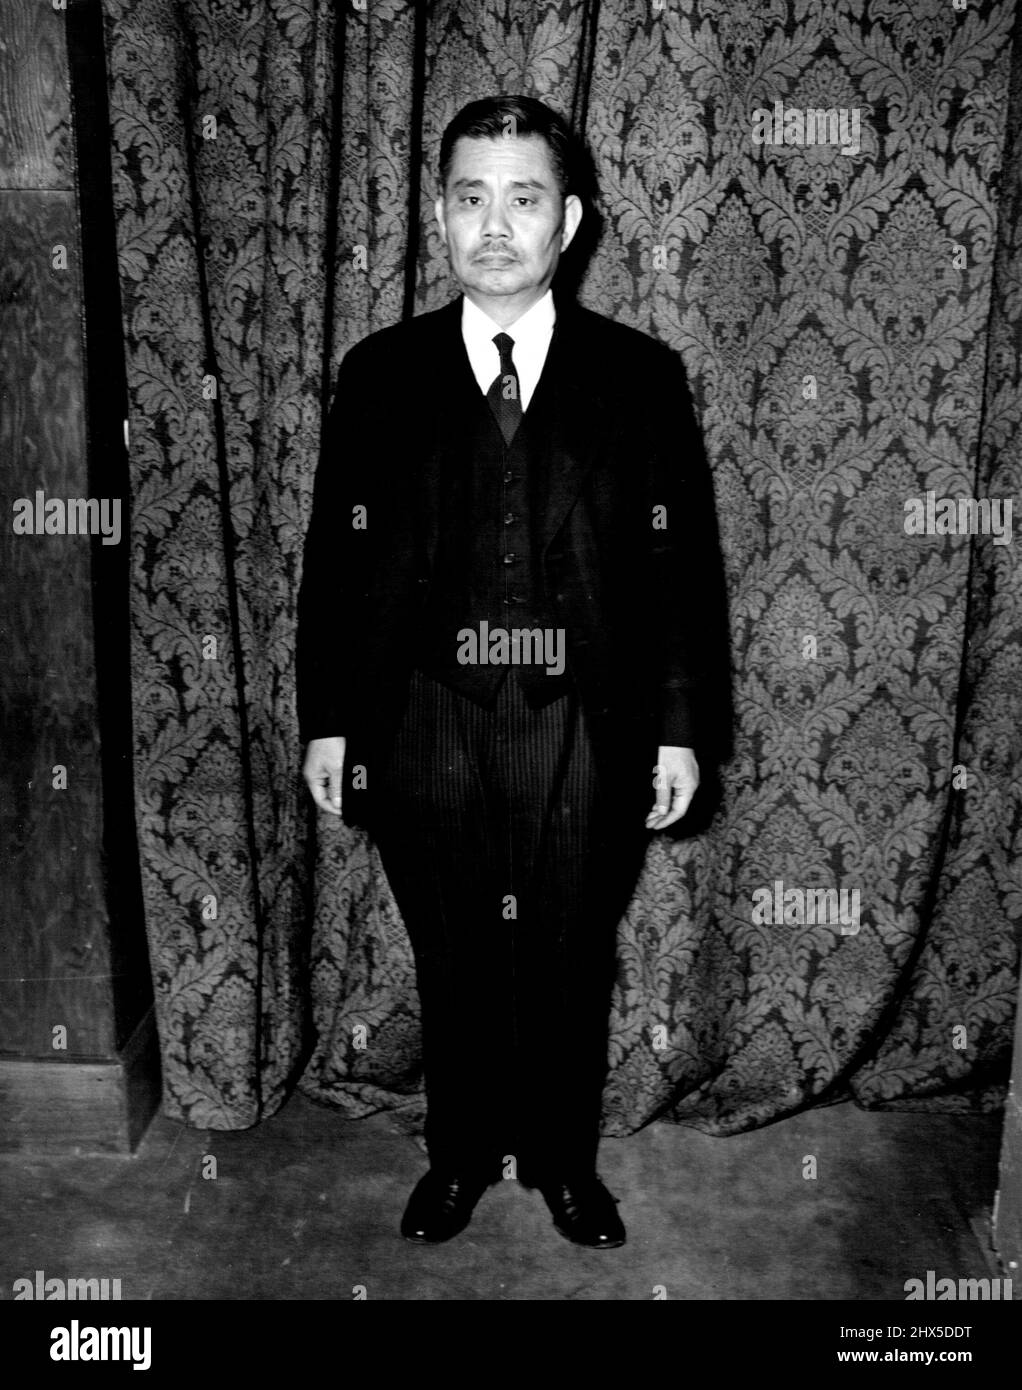 Alleged Japanese War Criminal on trial at IMTFE : Okinori Kaya, one of the 26 alleged Japanese war Criminals now on trial at the International Military tribunal for the Far East, in the war Ministry Blog., Tokyo, Japan. January 21, 1947. (Photo by Malone, Signal Corps U.S. Army). Stock Photo